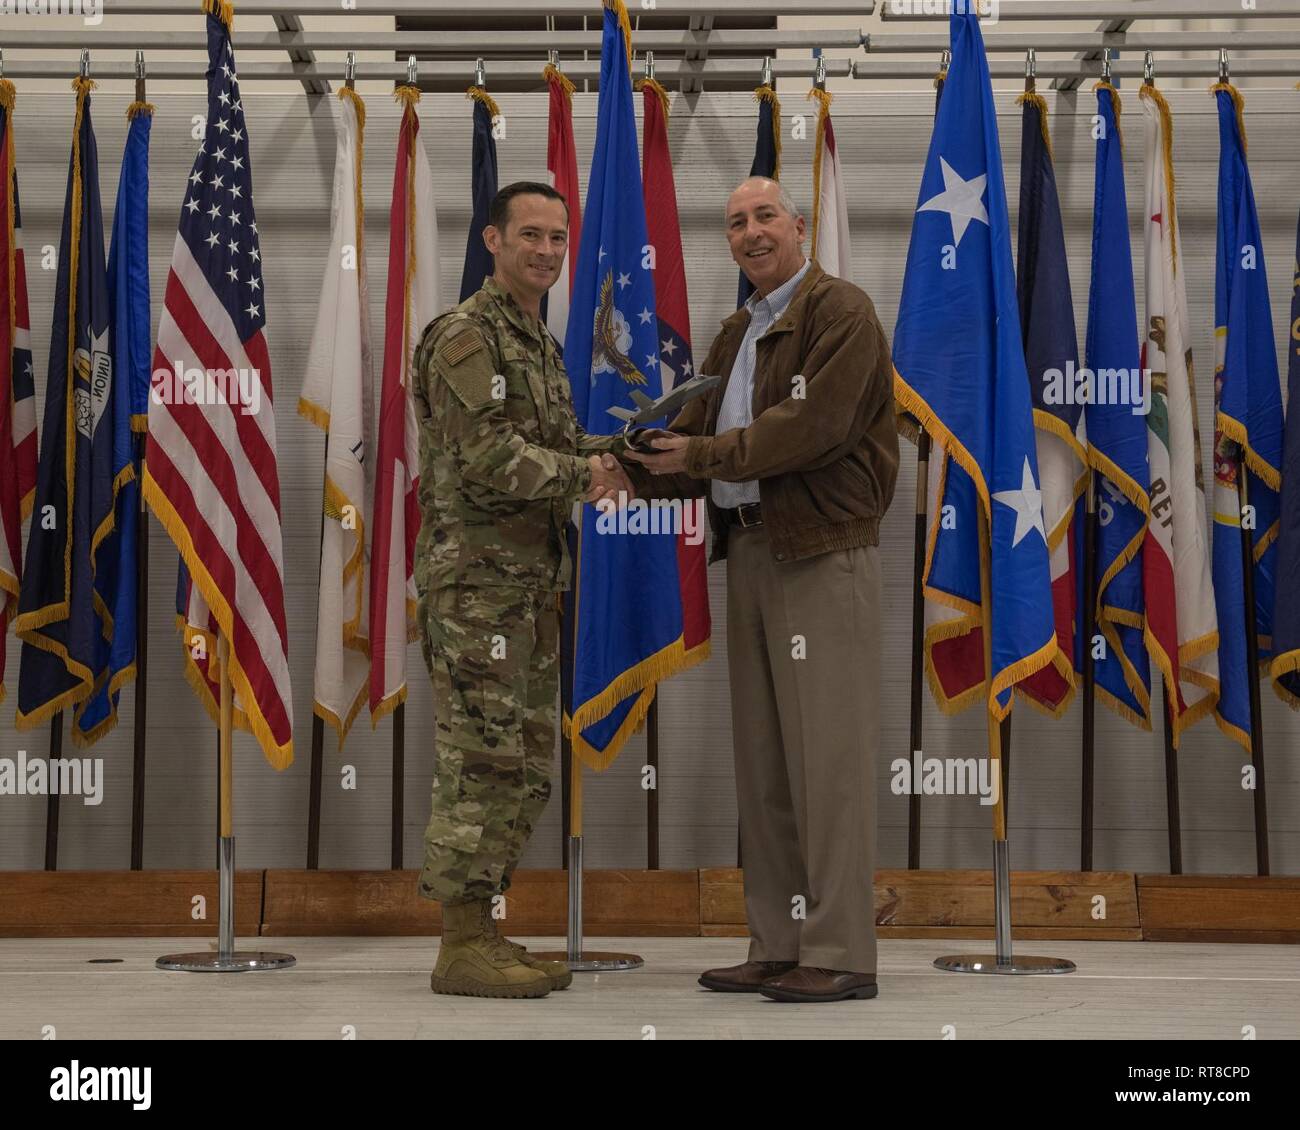 https://c8.alamy.com/comp/RT8CPD/mr-jerry-williams-an-outgoing-member-of-the-air-education-and-training-command-commanders-civic-leader-group-is-presented-with-a-token-of-appreciation-by-col-paul-moga-33rd-fighter-wing-commander-during-the-2018-annual-awards-ceremony-jan-25-2019-at-eglin-air-force-base-fla-williams-selflessly-devoted-his-time-and-resources-to-champion-the-needs-of-the-33rd-fw-at-the-major-command-level-and-provided-support-to-the-local-aetc-community-RT8CPD.jpg